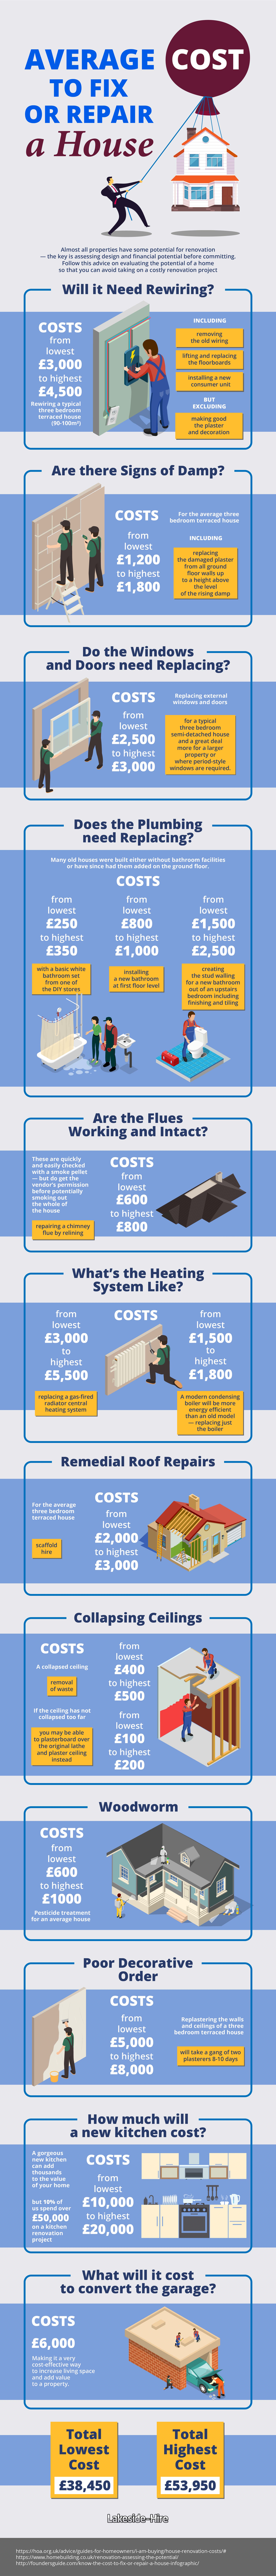 SsrNjRa The cost of repairing a house [Infographic]